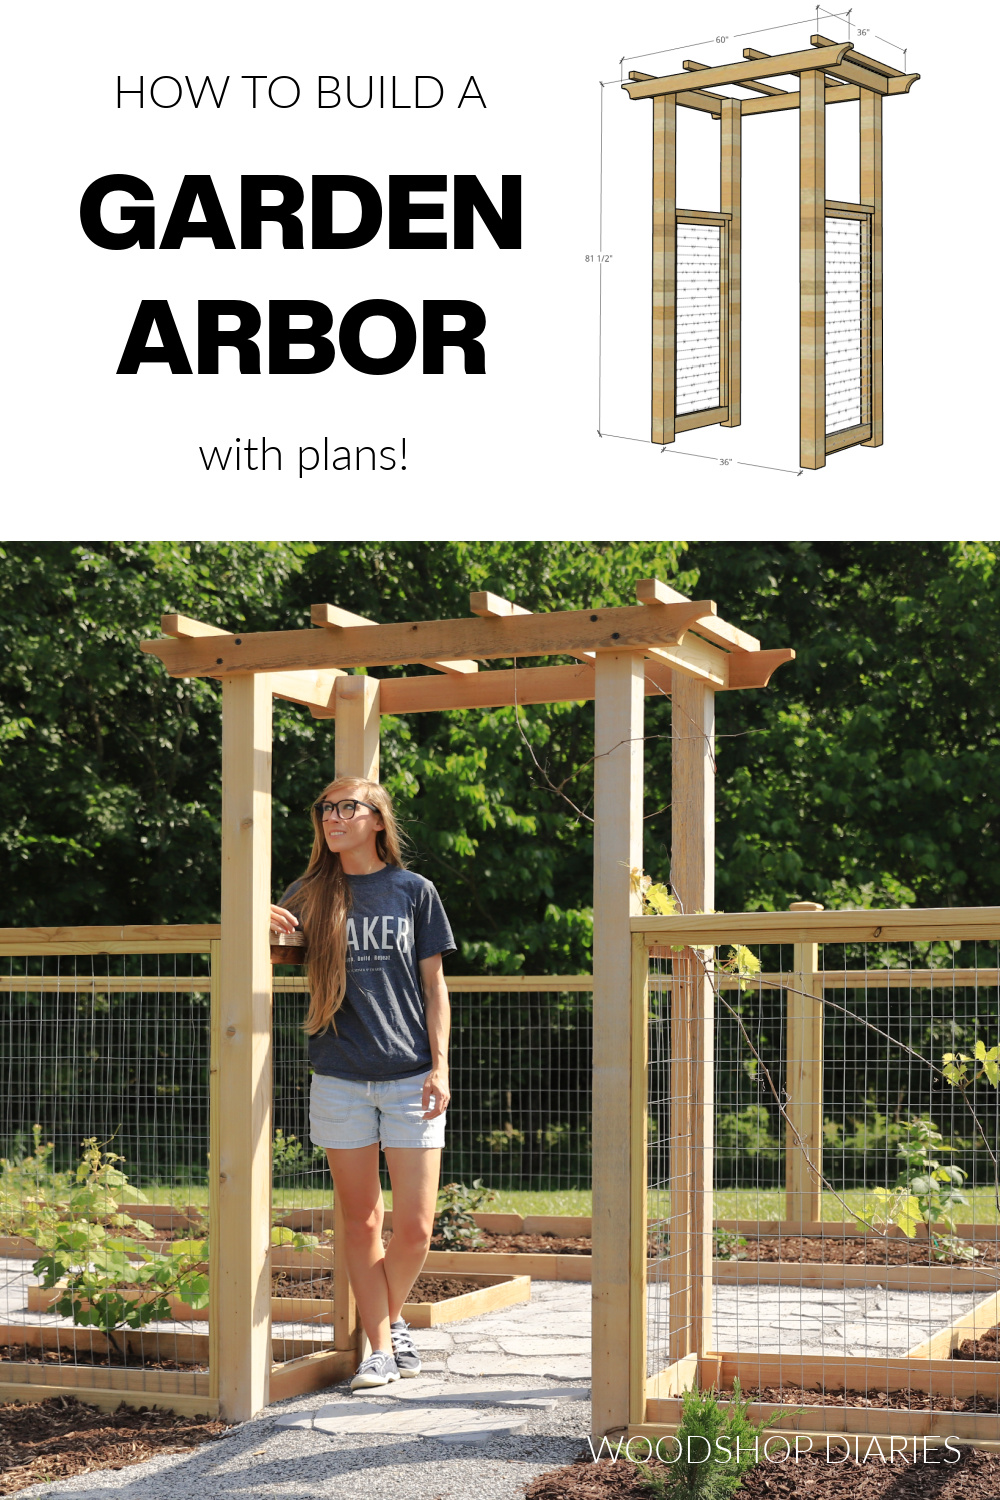 Pinterest collage image showing diagram of arbor at top and completed arbor photo at bottom with text "how to build a garden arbor with plans"